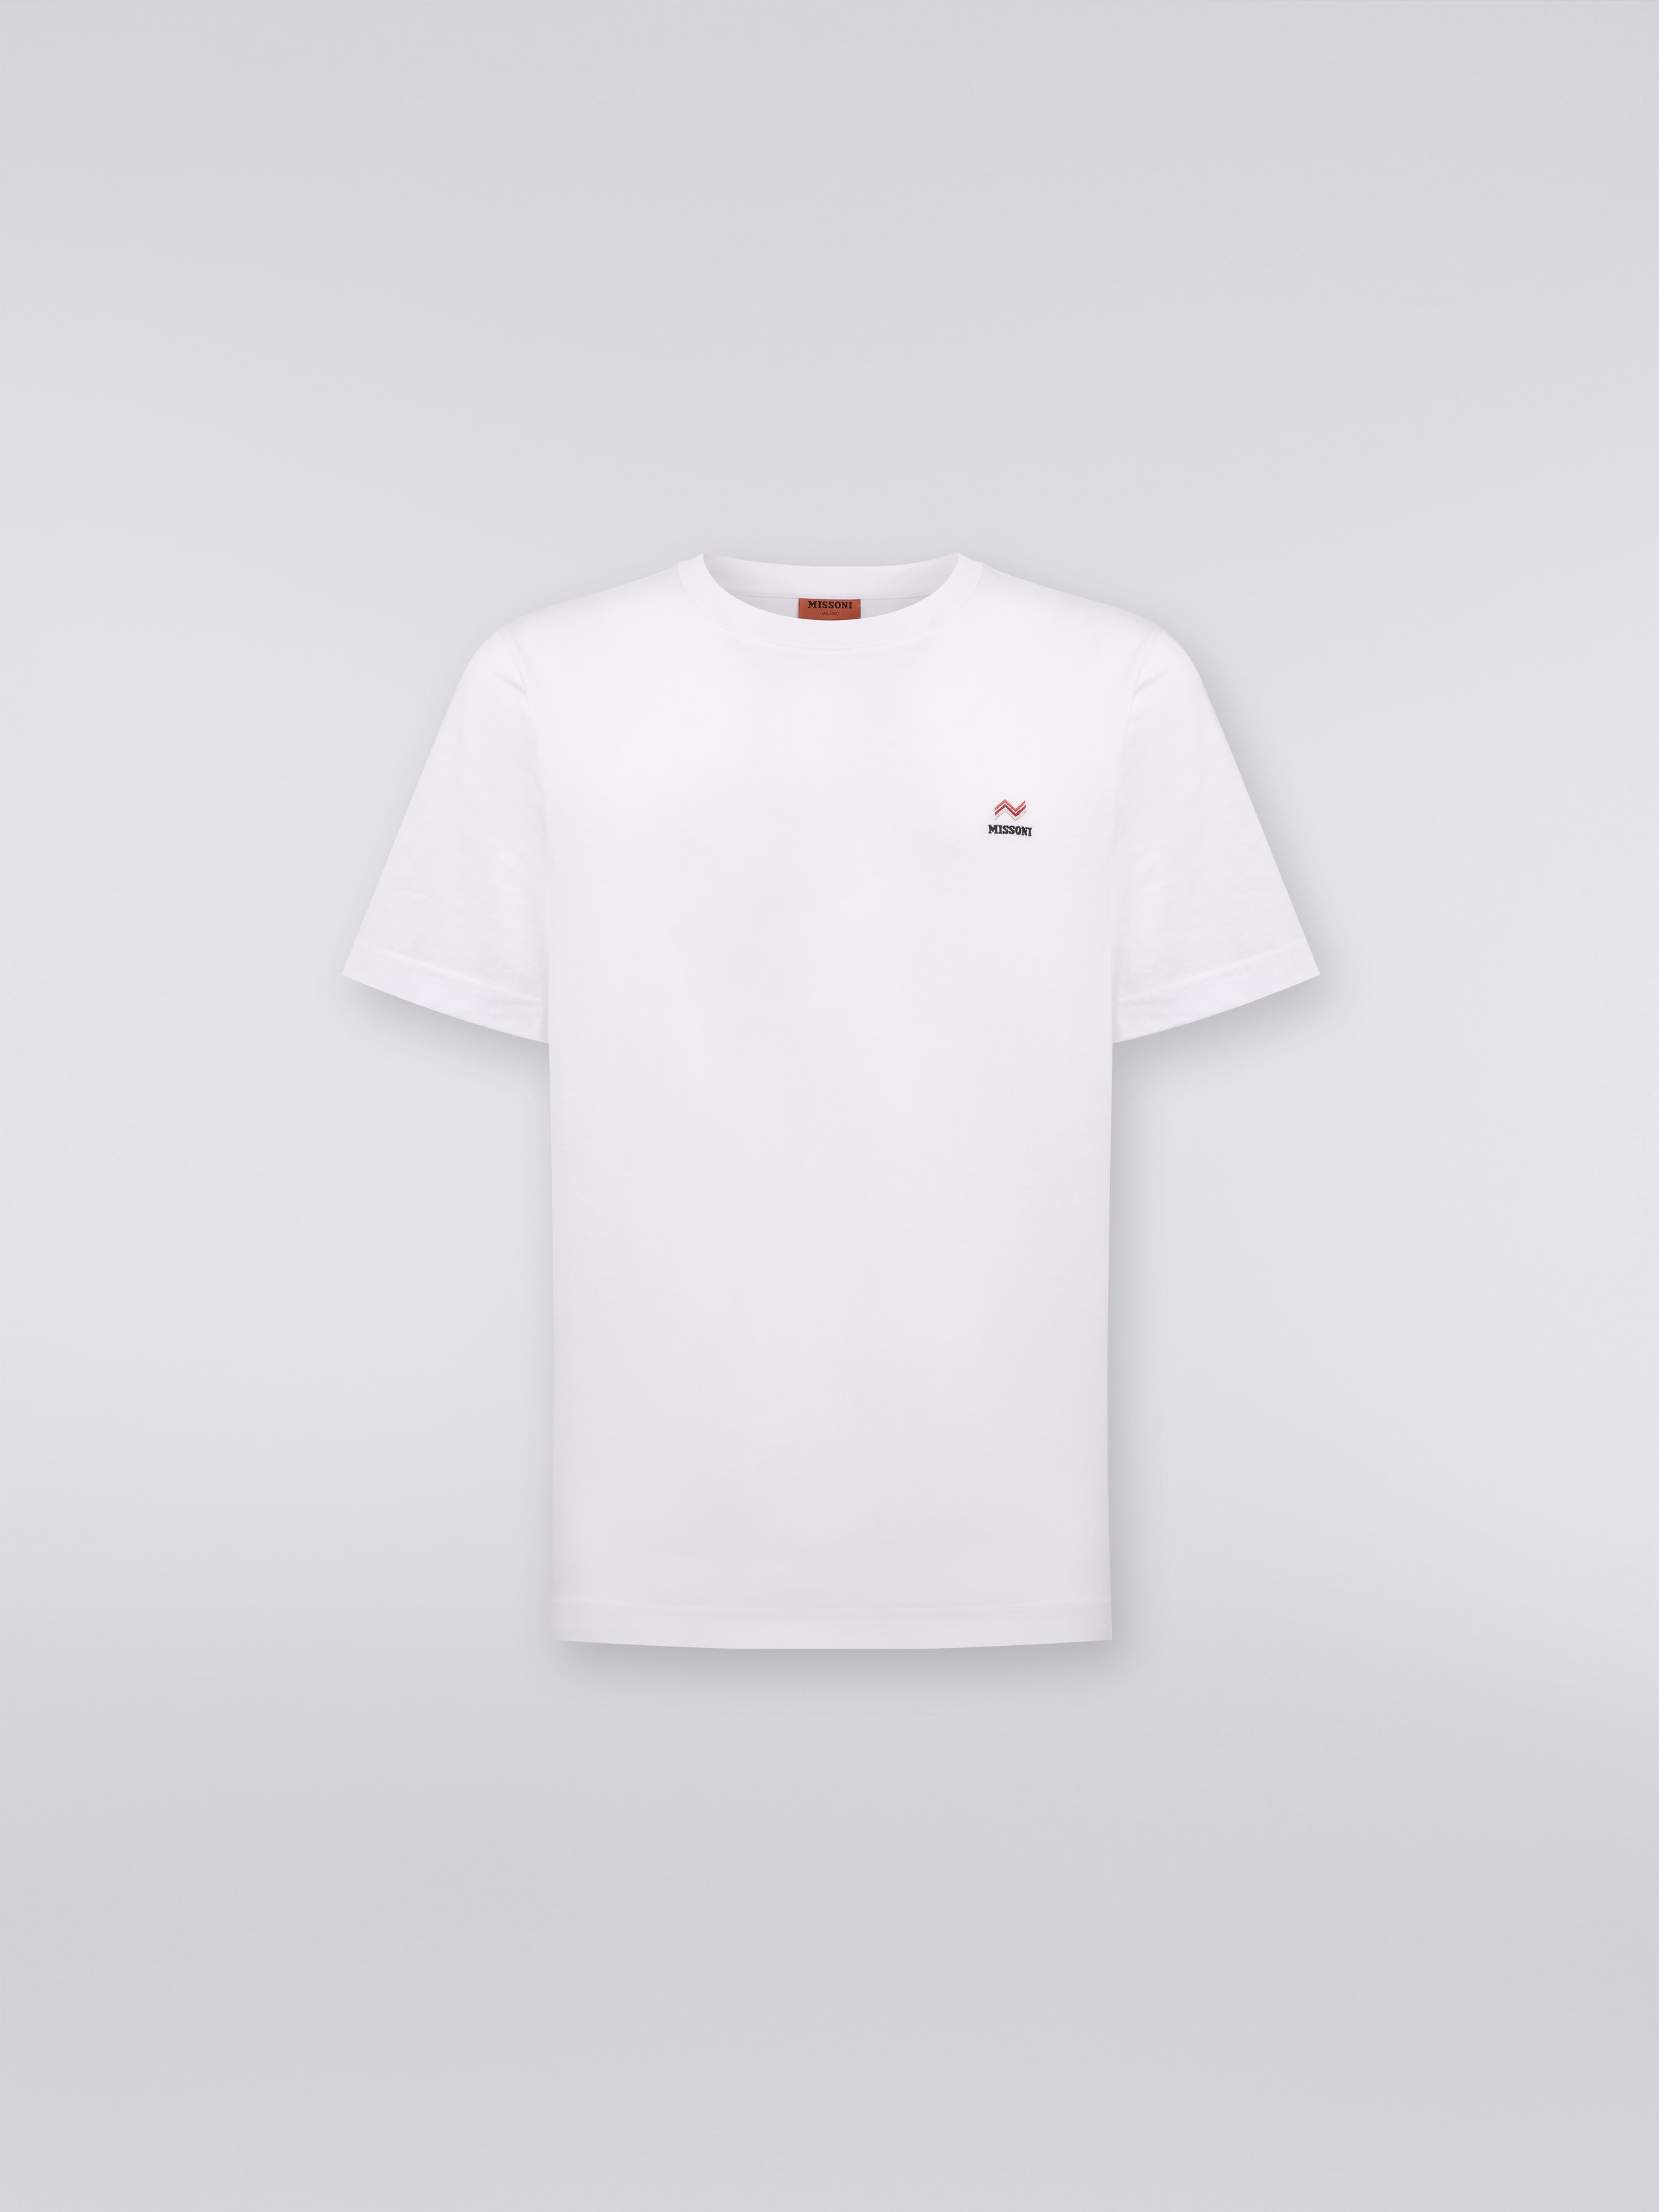 Crew-neck cotton T-shirt with embroidery and logo, White  - 0